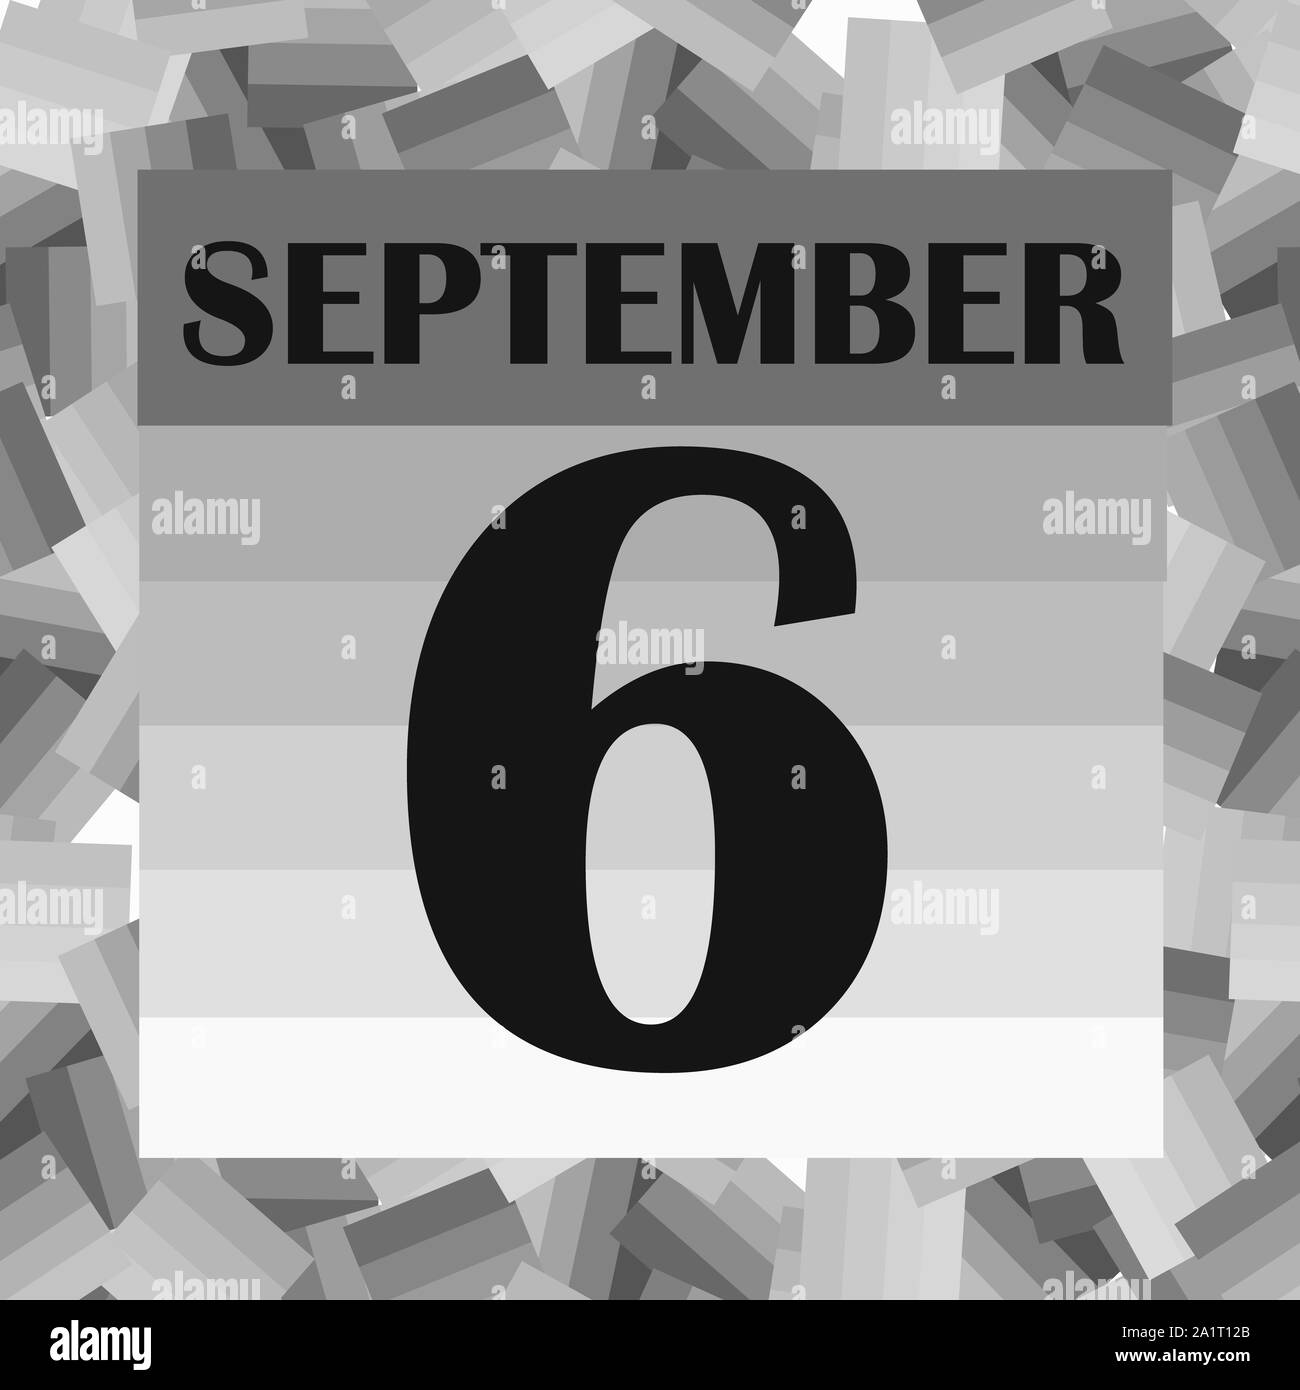 September 6 icon. For planning important day. Banner for holidays and special days. Illustration in black and white colors. Stock Photo